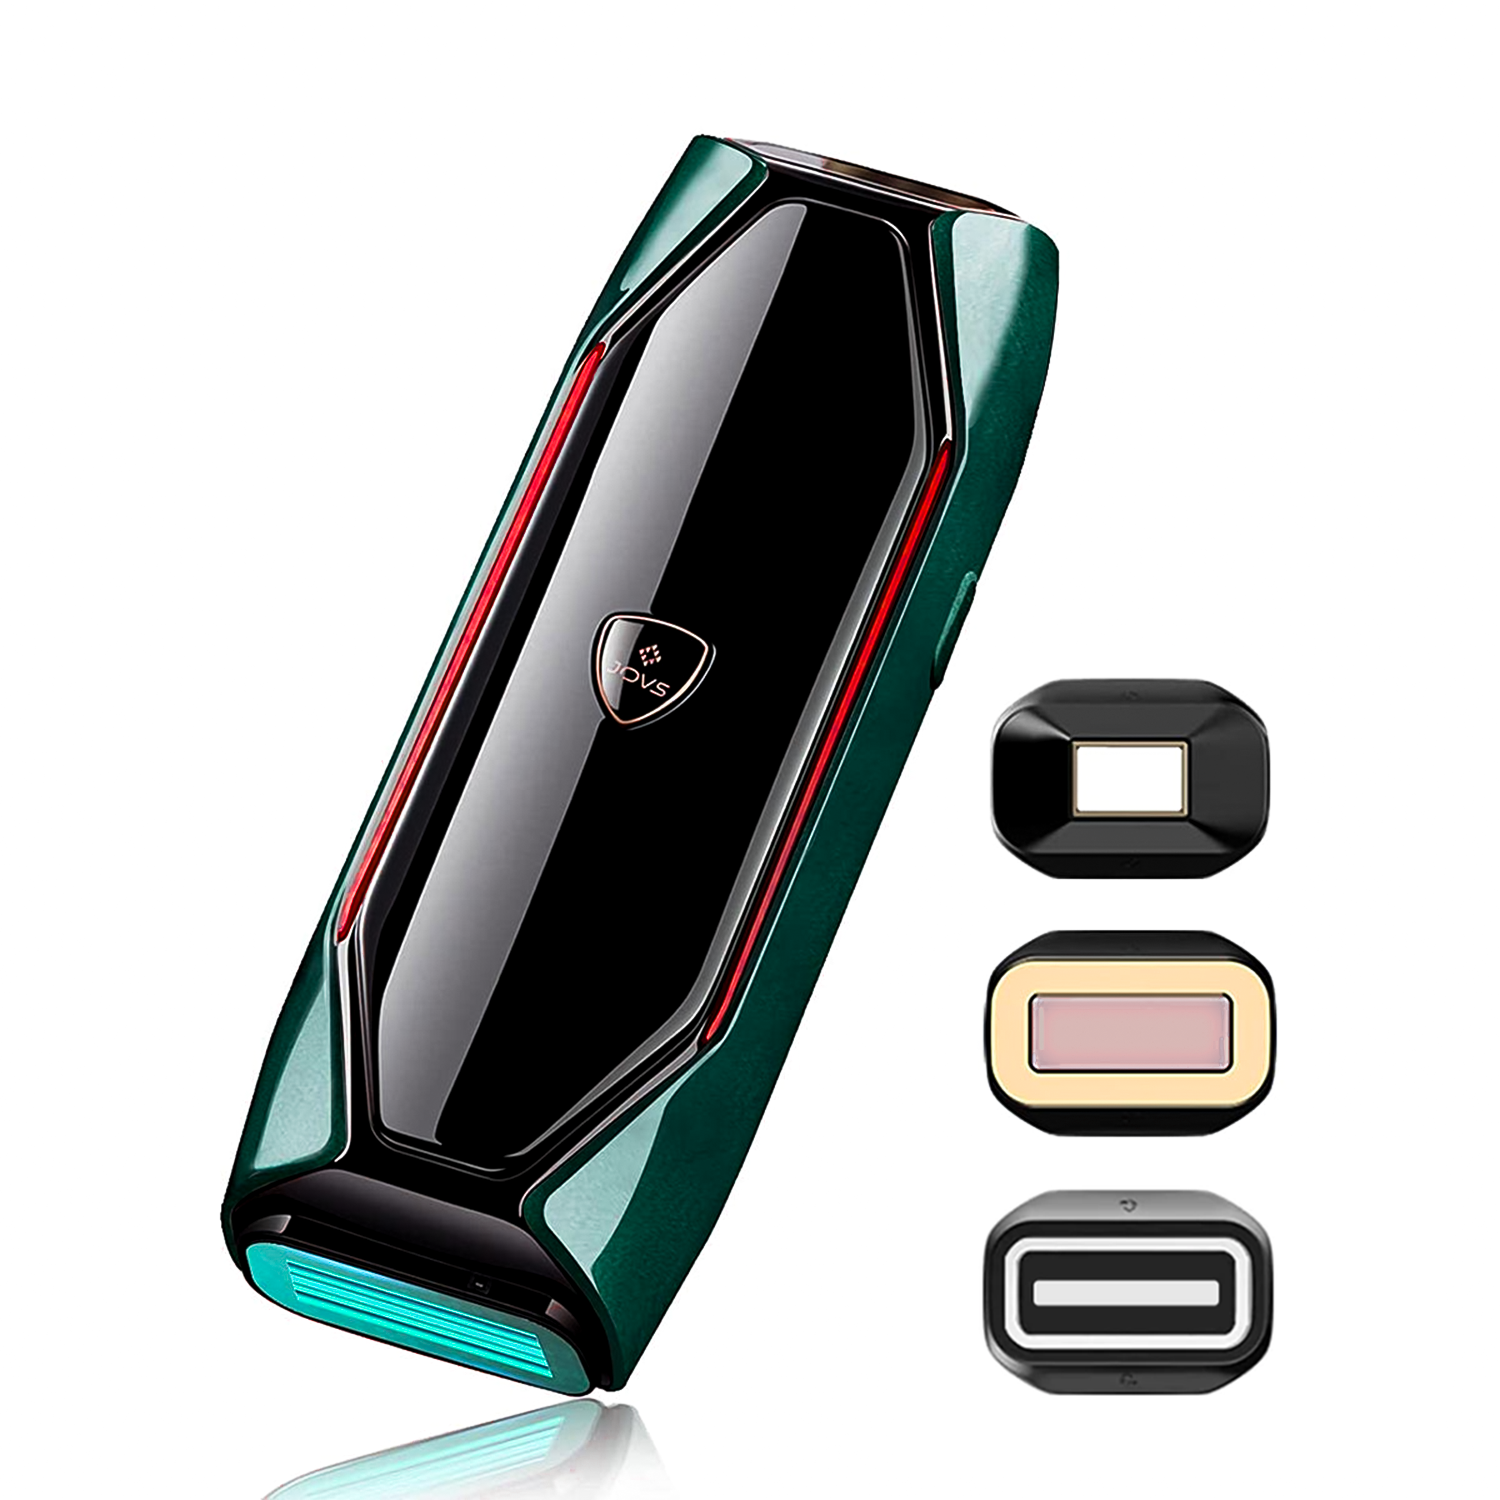 JOVS X™ 3-in-1 IPL Hair Removal Device